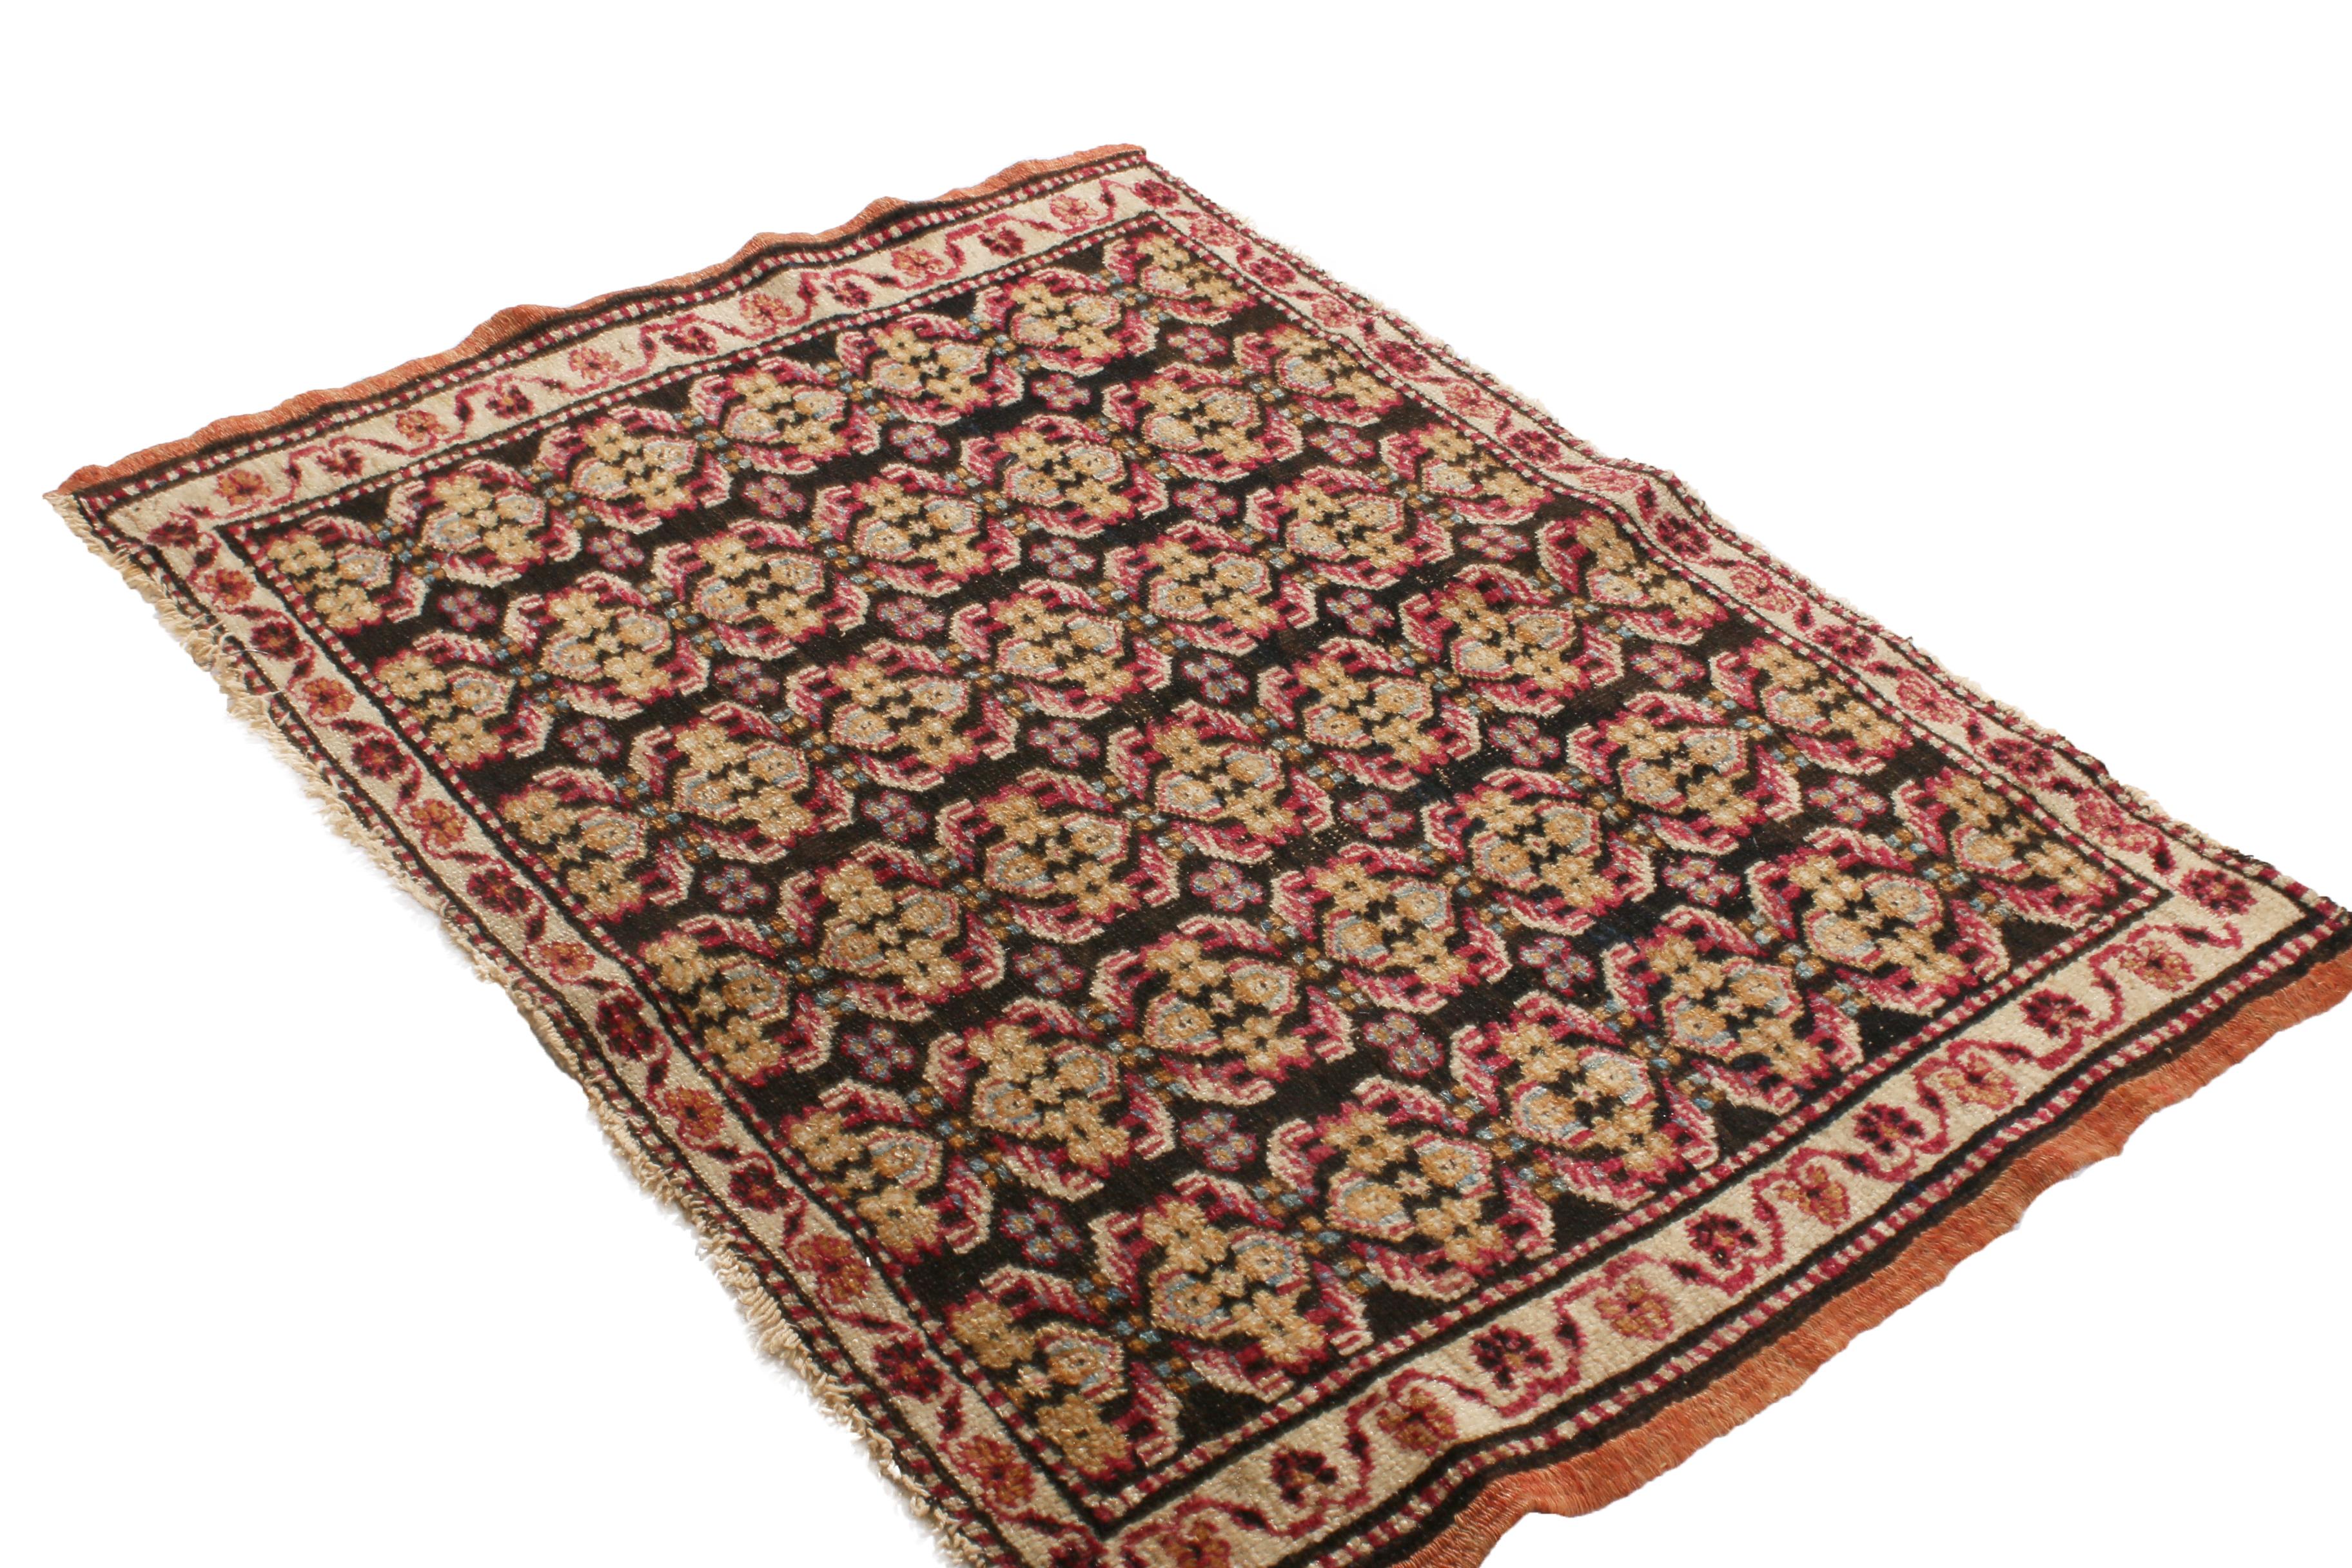 Hailing from India between 1890-1900, this hypnotic antique Agra rug is hand-knotted in high-quality wool with a hypnotic departure from traditional designs in its field. Emboldened by a partisan pairing of beige and red colorways against a black